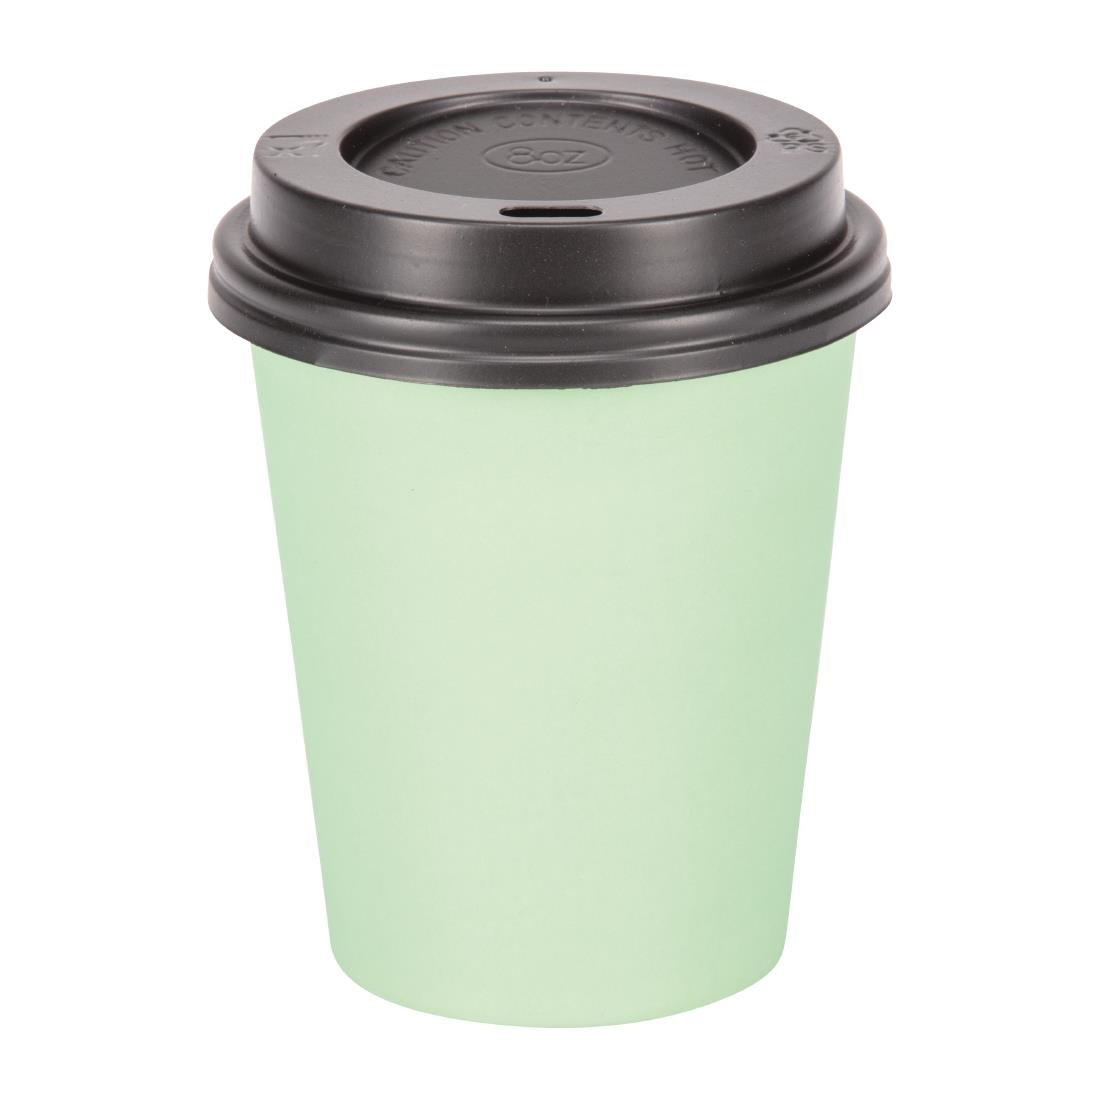 GP400 Fiesta Recyclable Coffee Cups Single Wall Turquoise 225ml / 8oz (Pack of 50) JD Catering Equipment Solutions Ltd